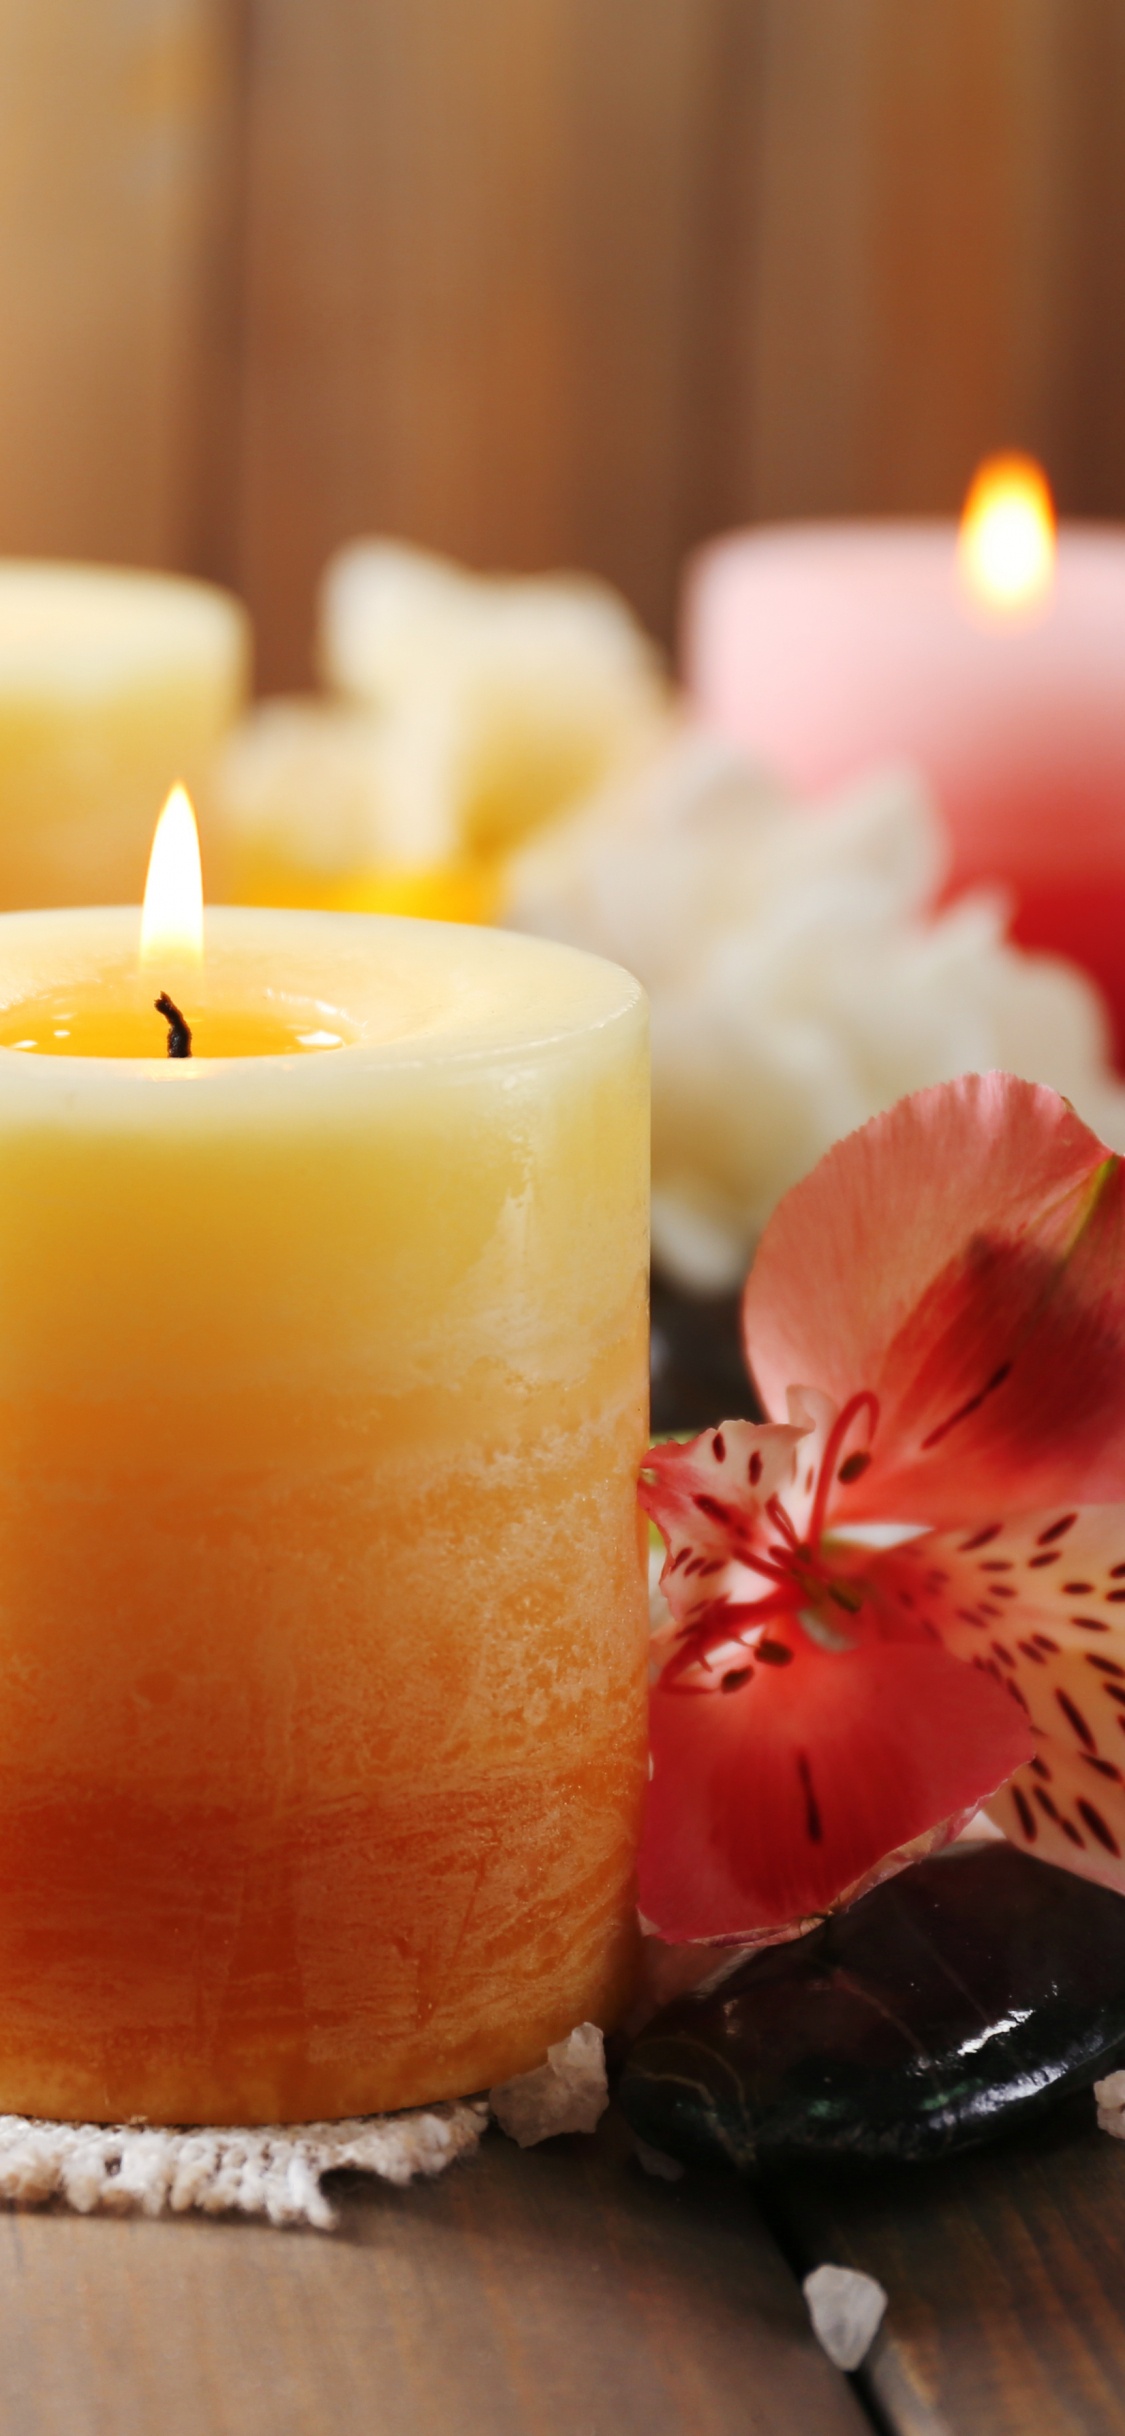 Candle, Wax, Lighting, Yellow, Flameless Candle. Wallpaper in 1125x2436 Resolution